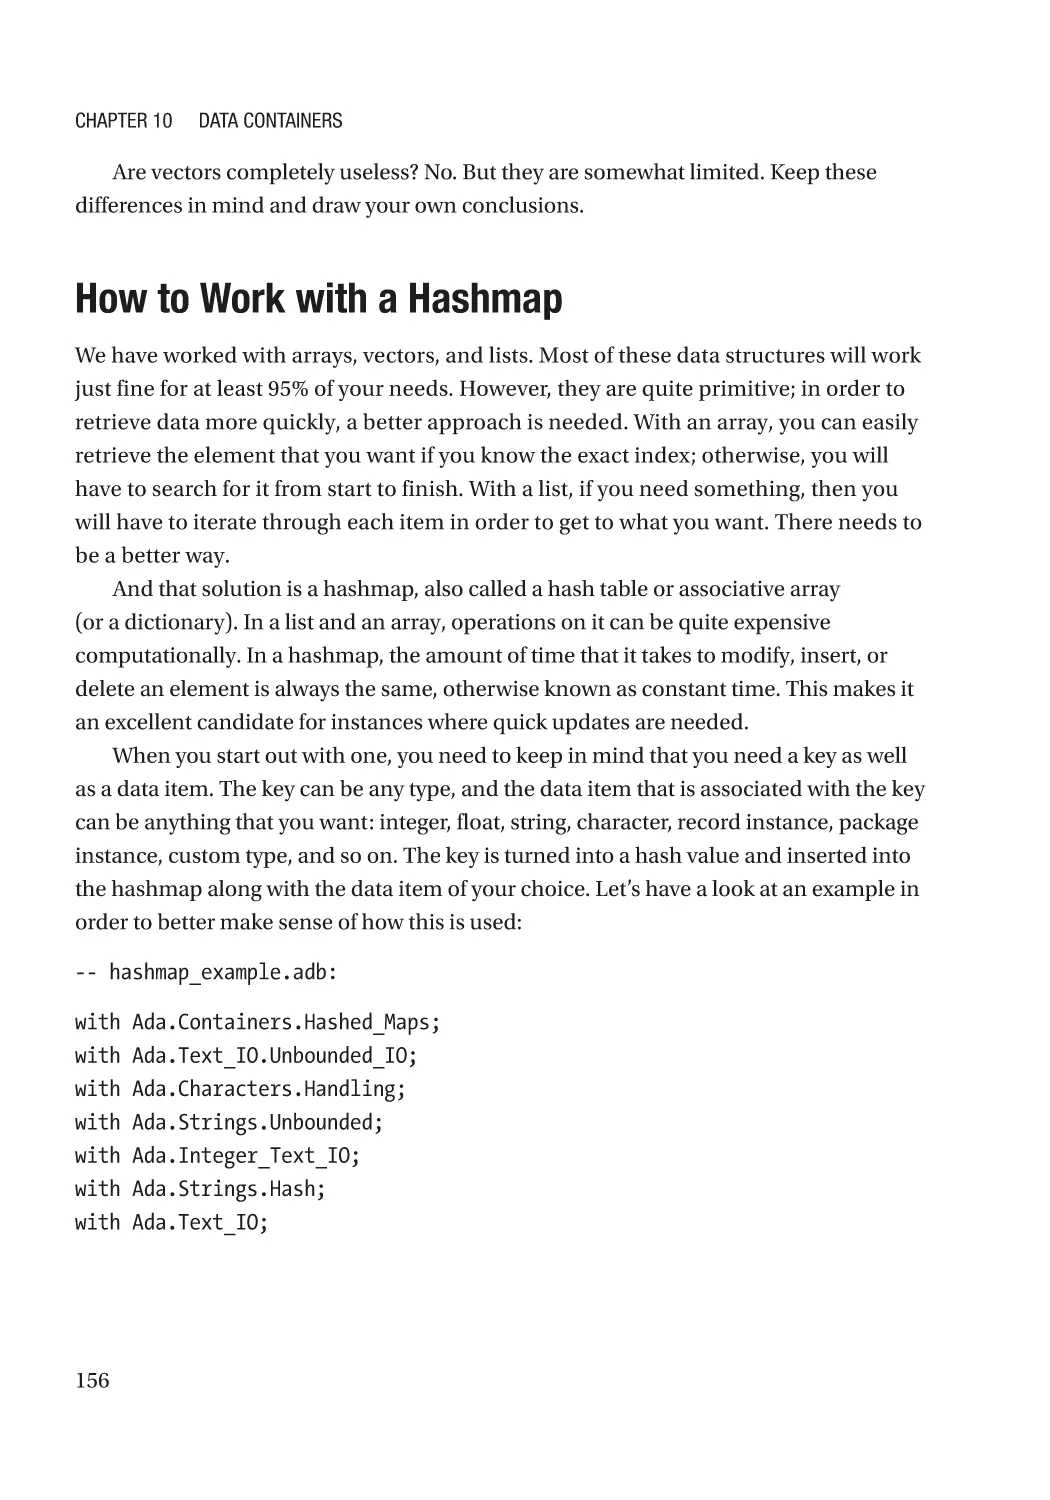 How to Work with a Hashmap